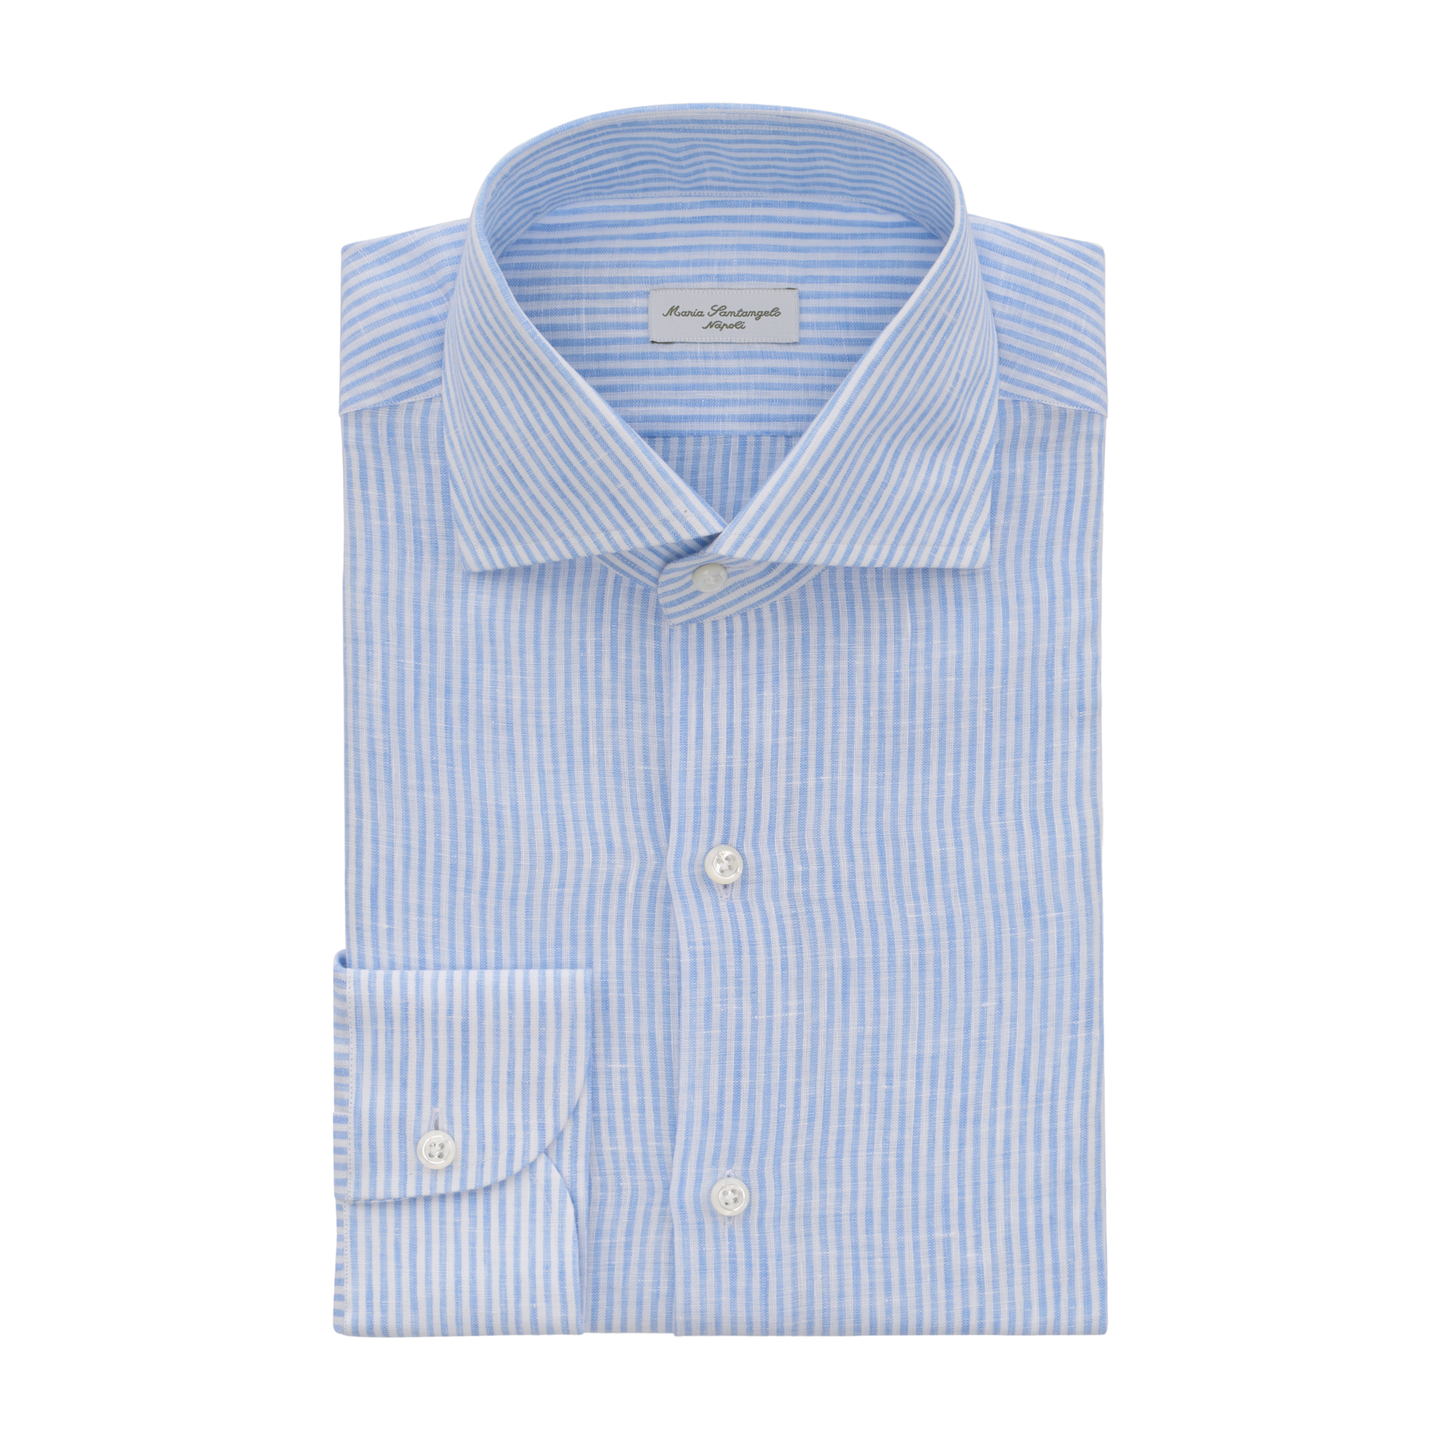 Striped Linen Shirt in Light Blue and White